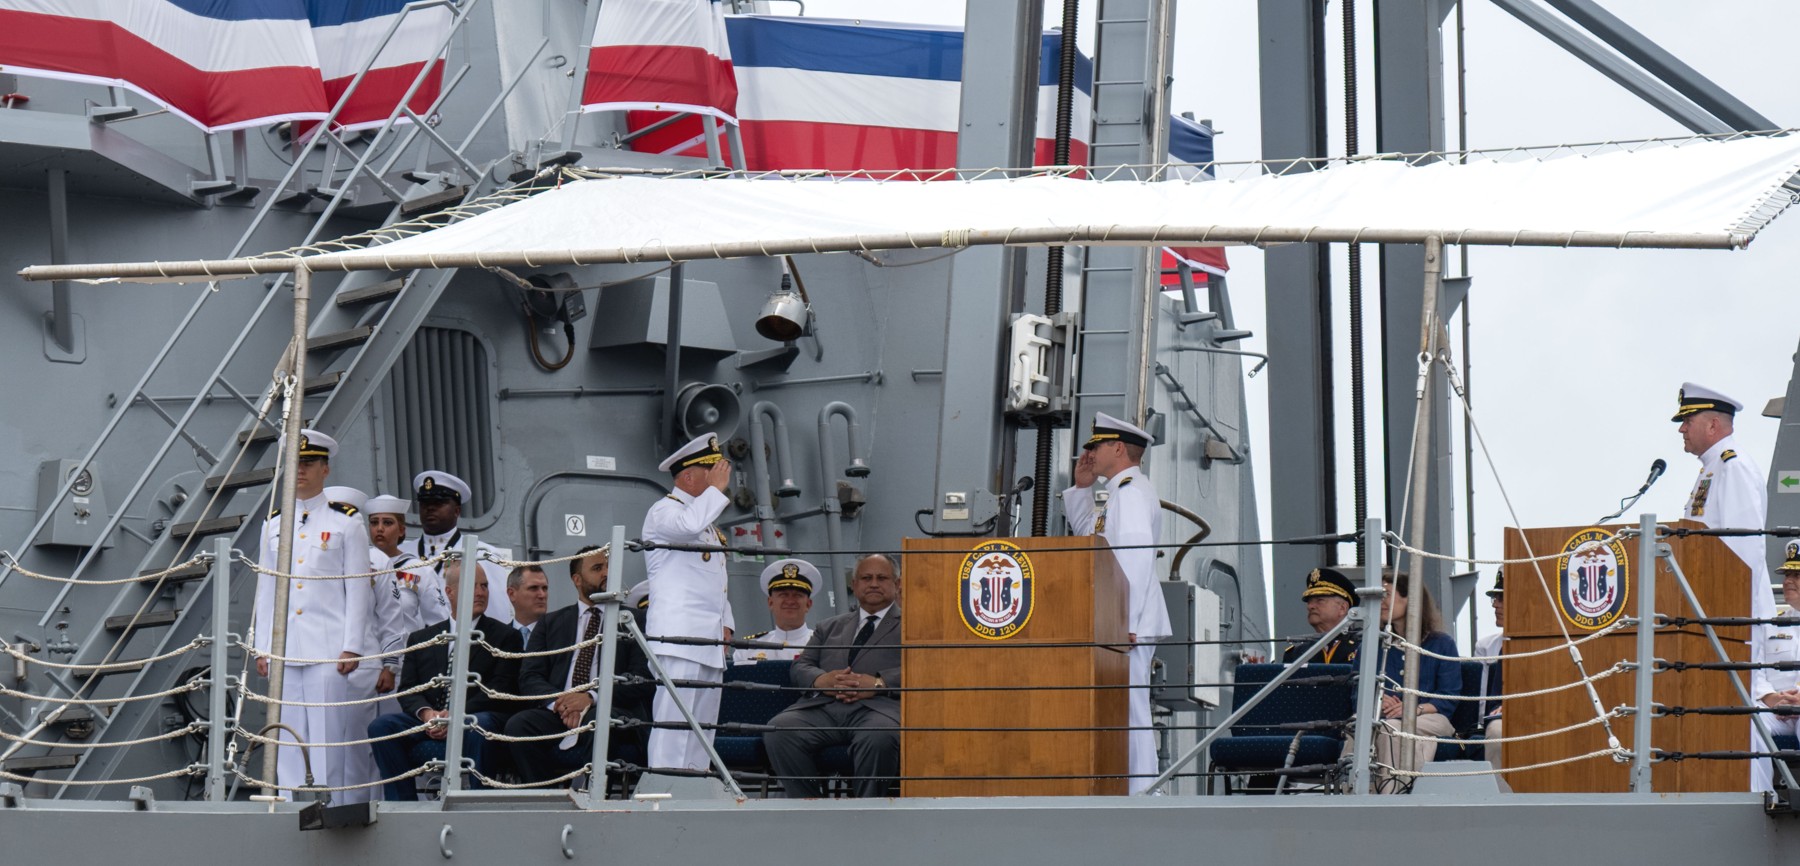 ddg-120 uss carl m. levin arleigh burke class guided missile destroyer commissioning baltimore maryland 47